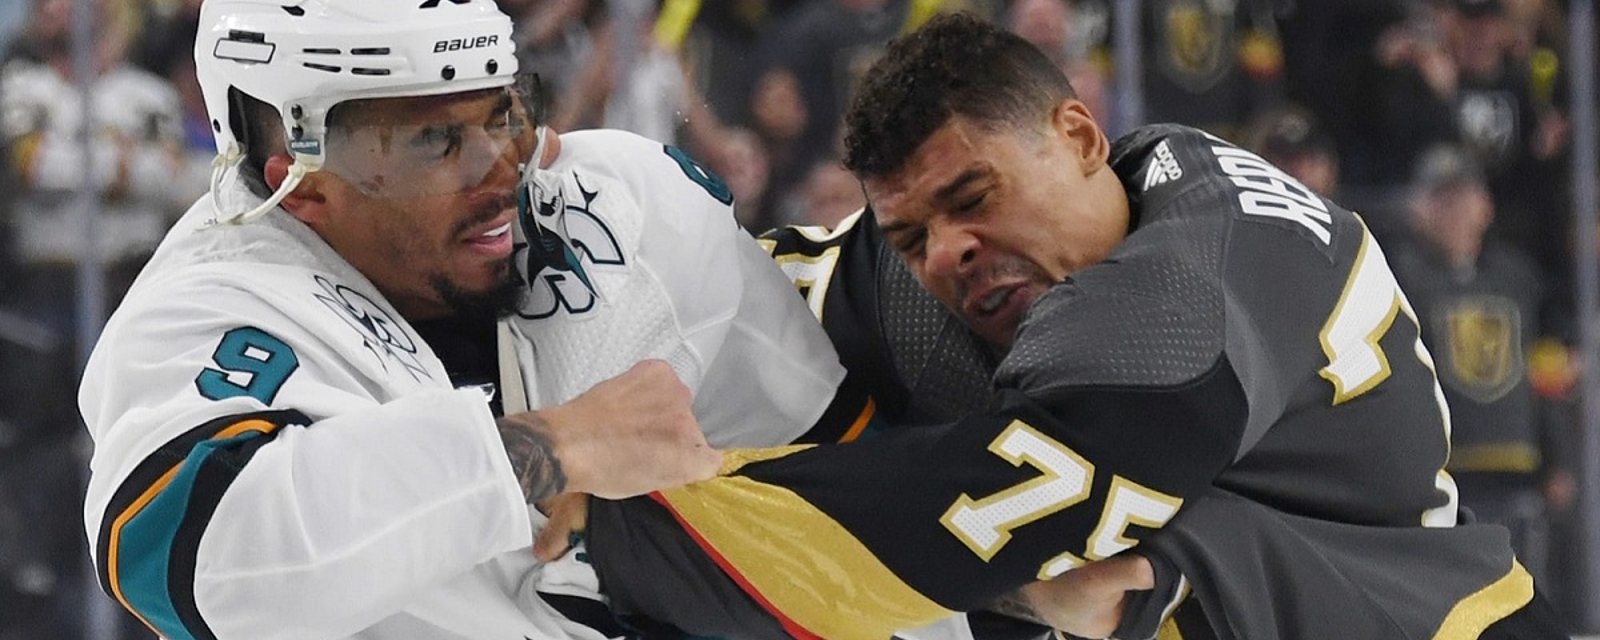 Evander Kane mocks Ryan Reaves after a chaotic incident in Game 1.